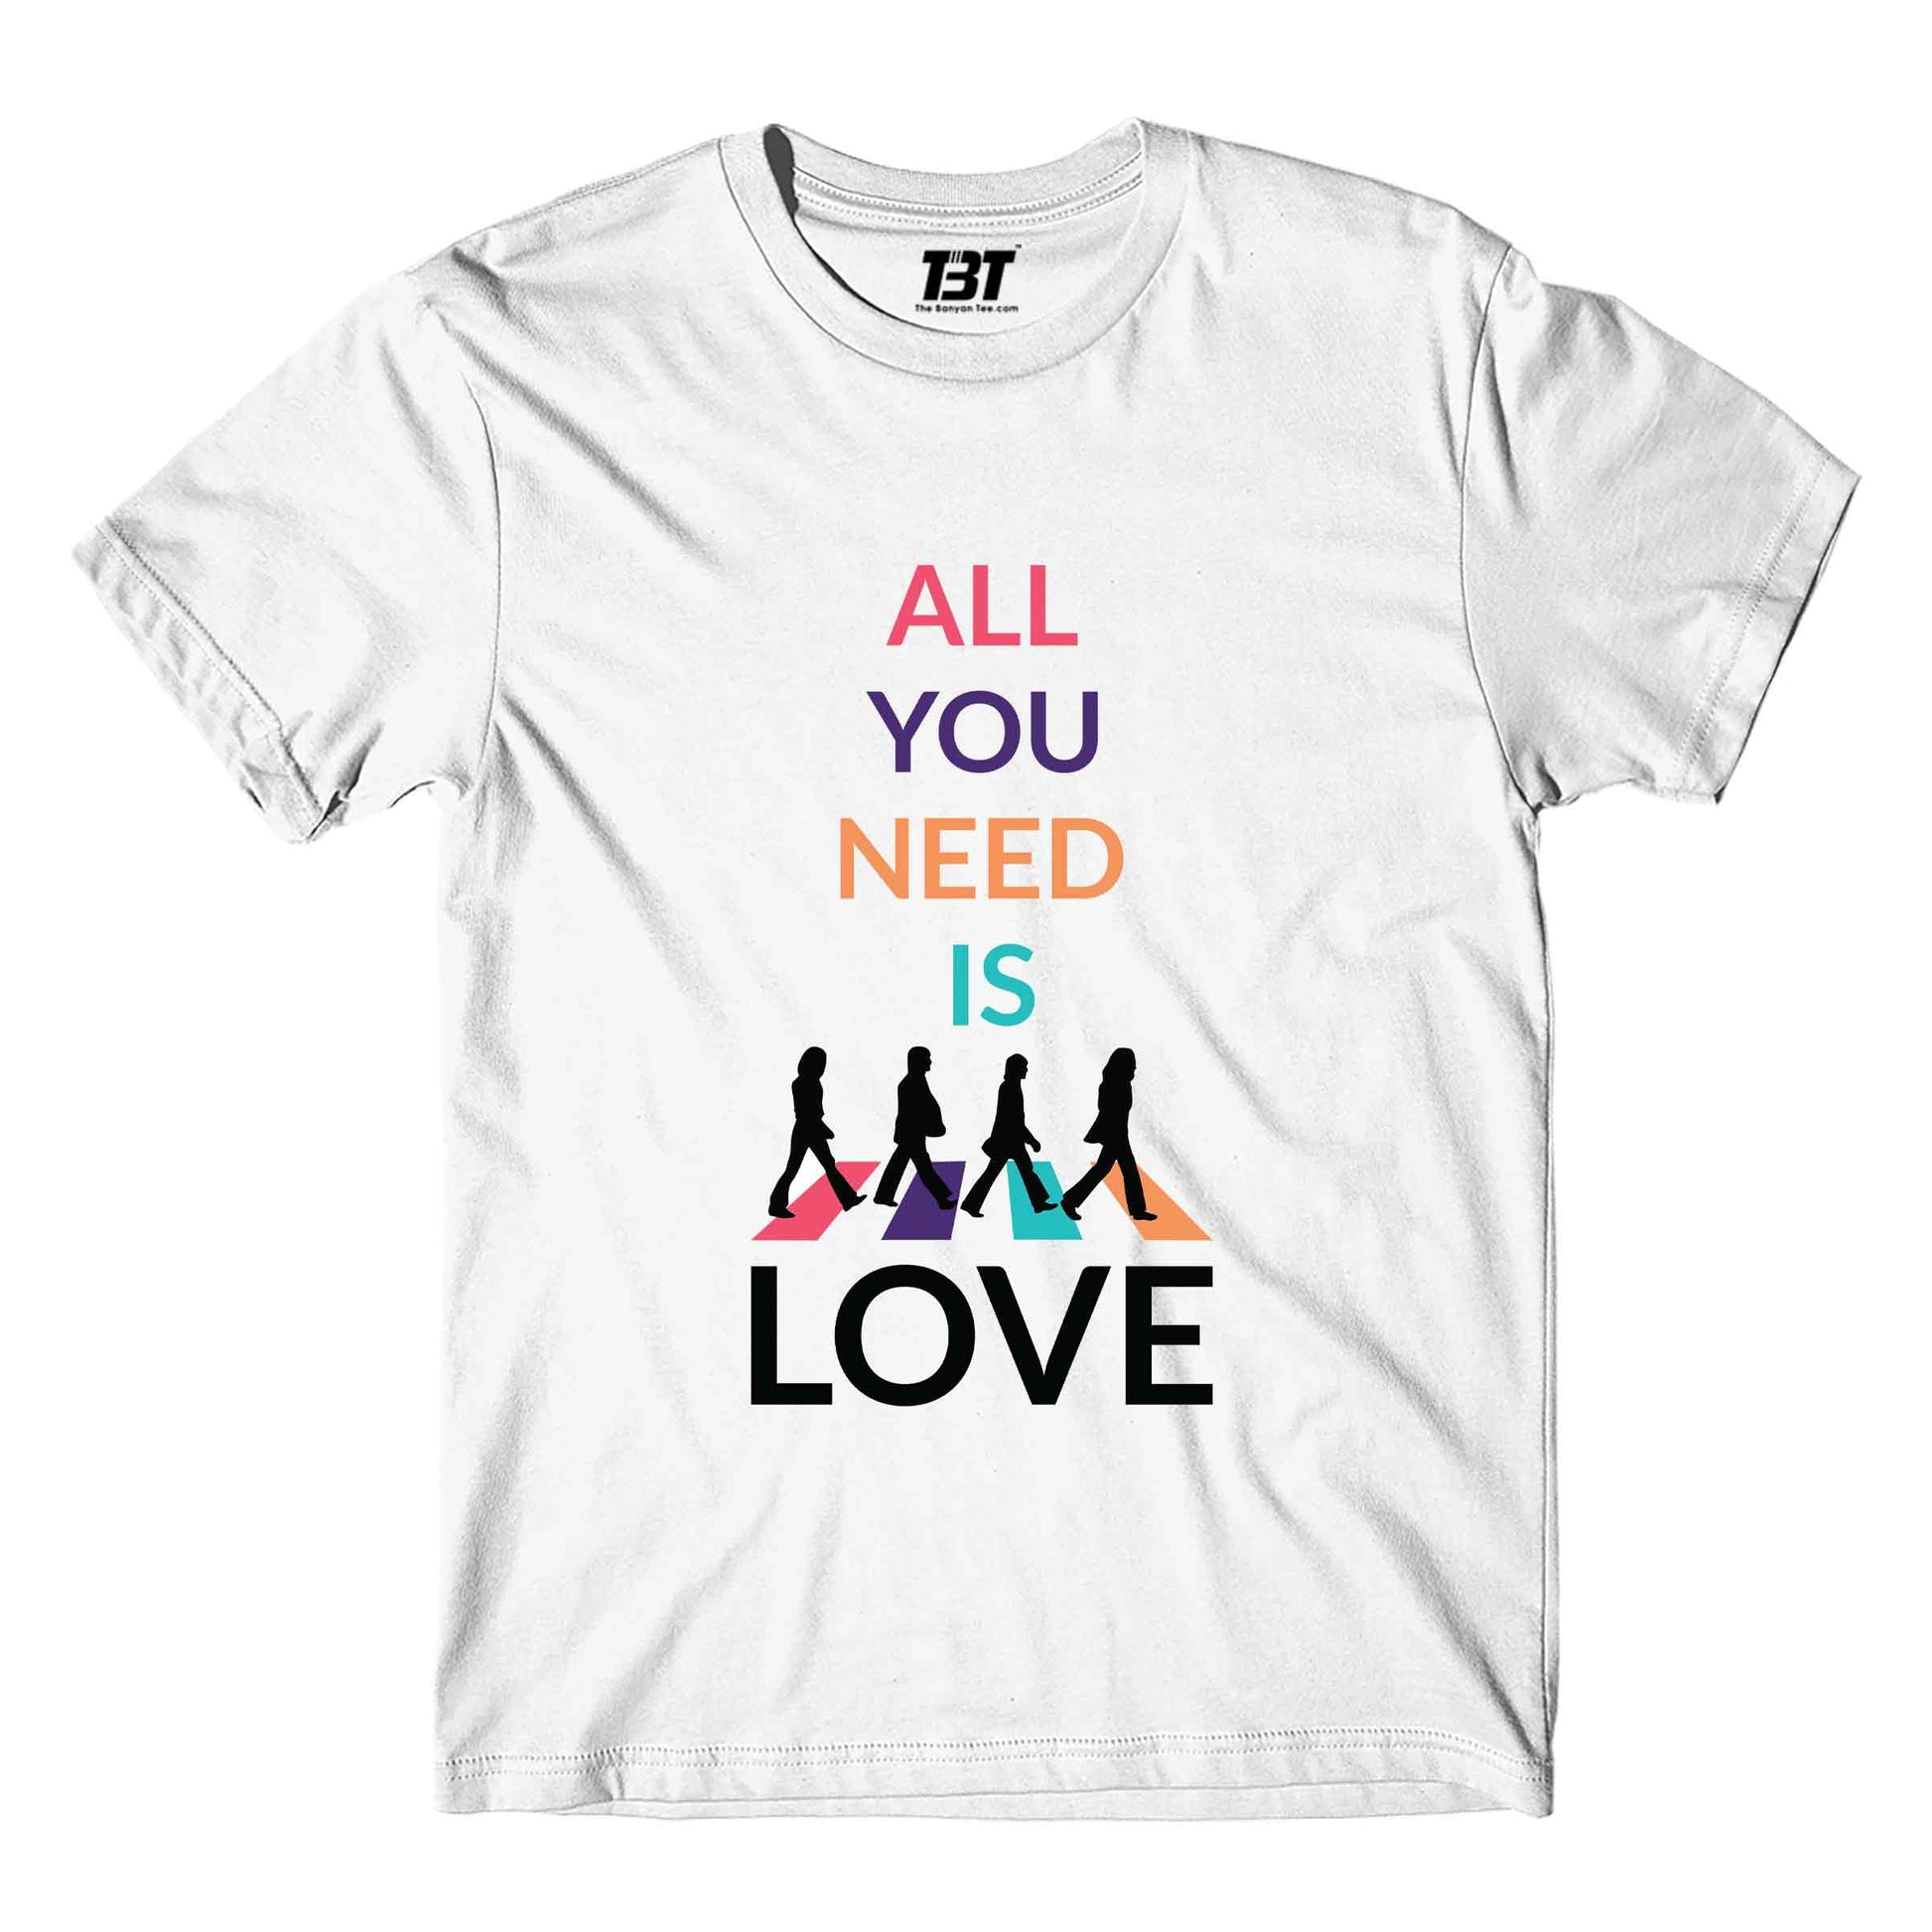 All You Need Is Love The Beatles T-shirt - T-shirt The Banyan Tee TBT shirt for men women boys designer stylish online cotton usa united states